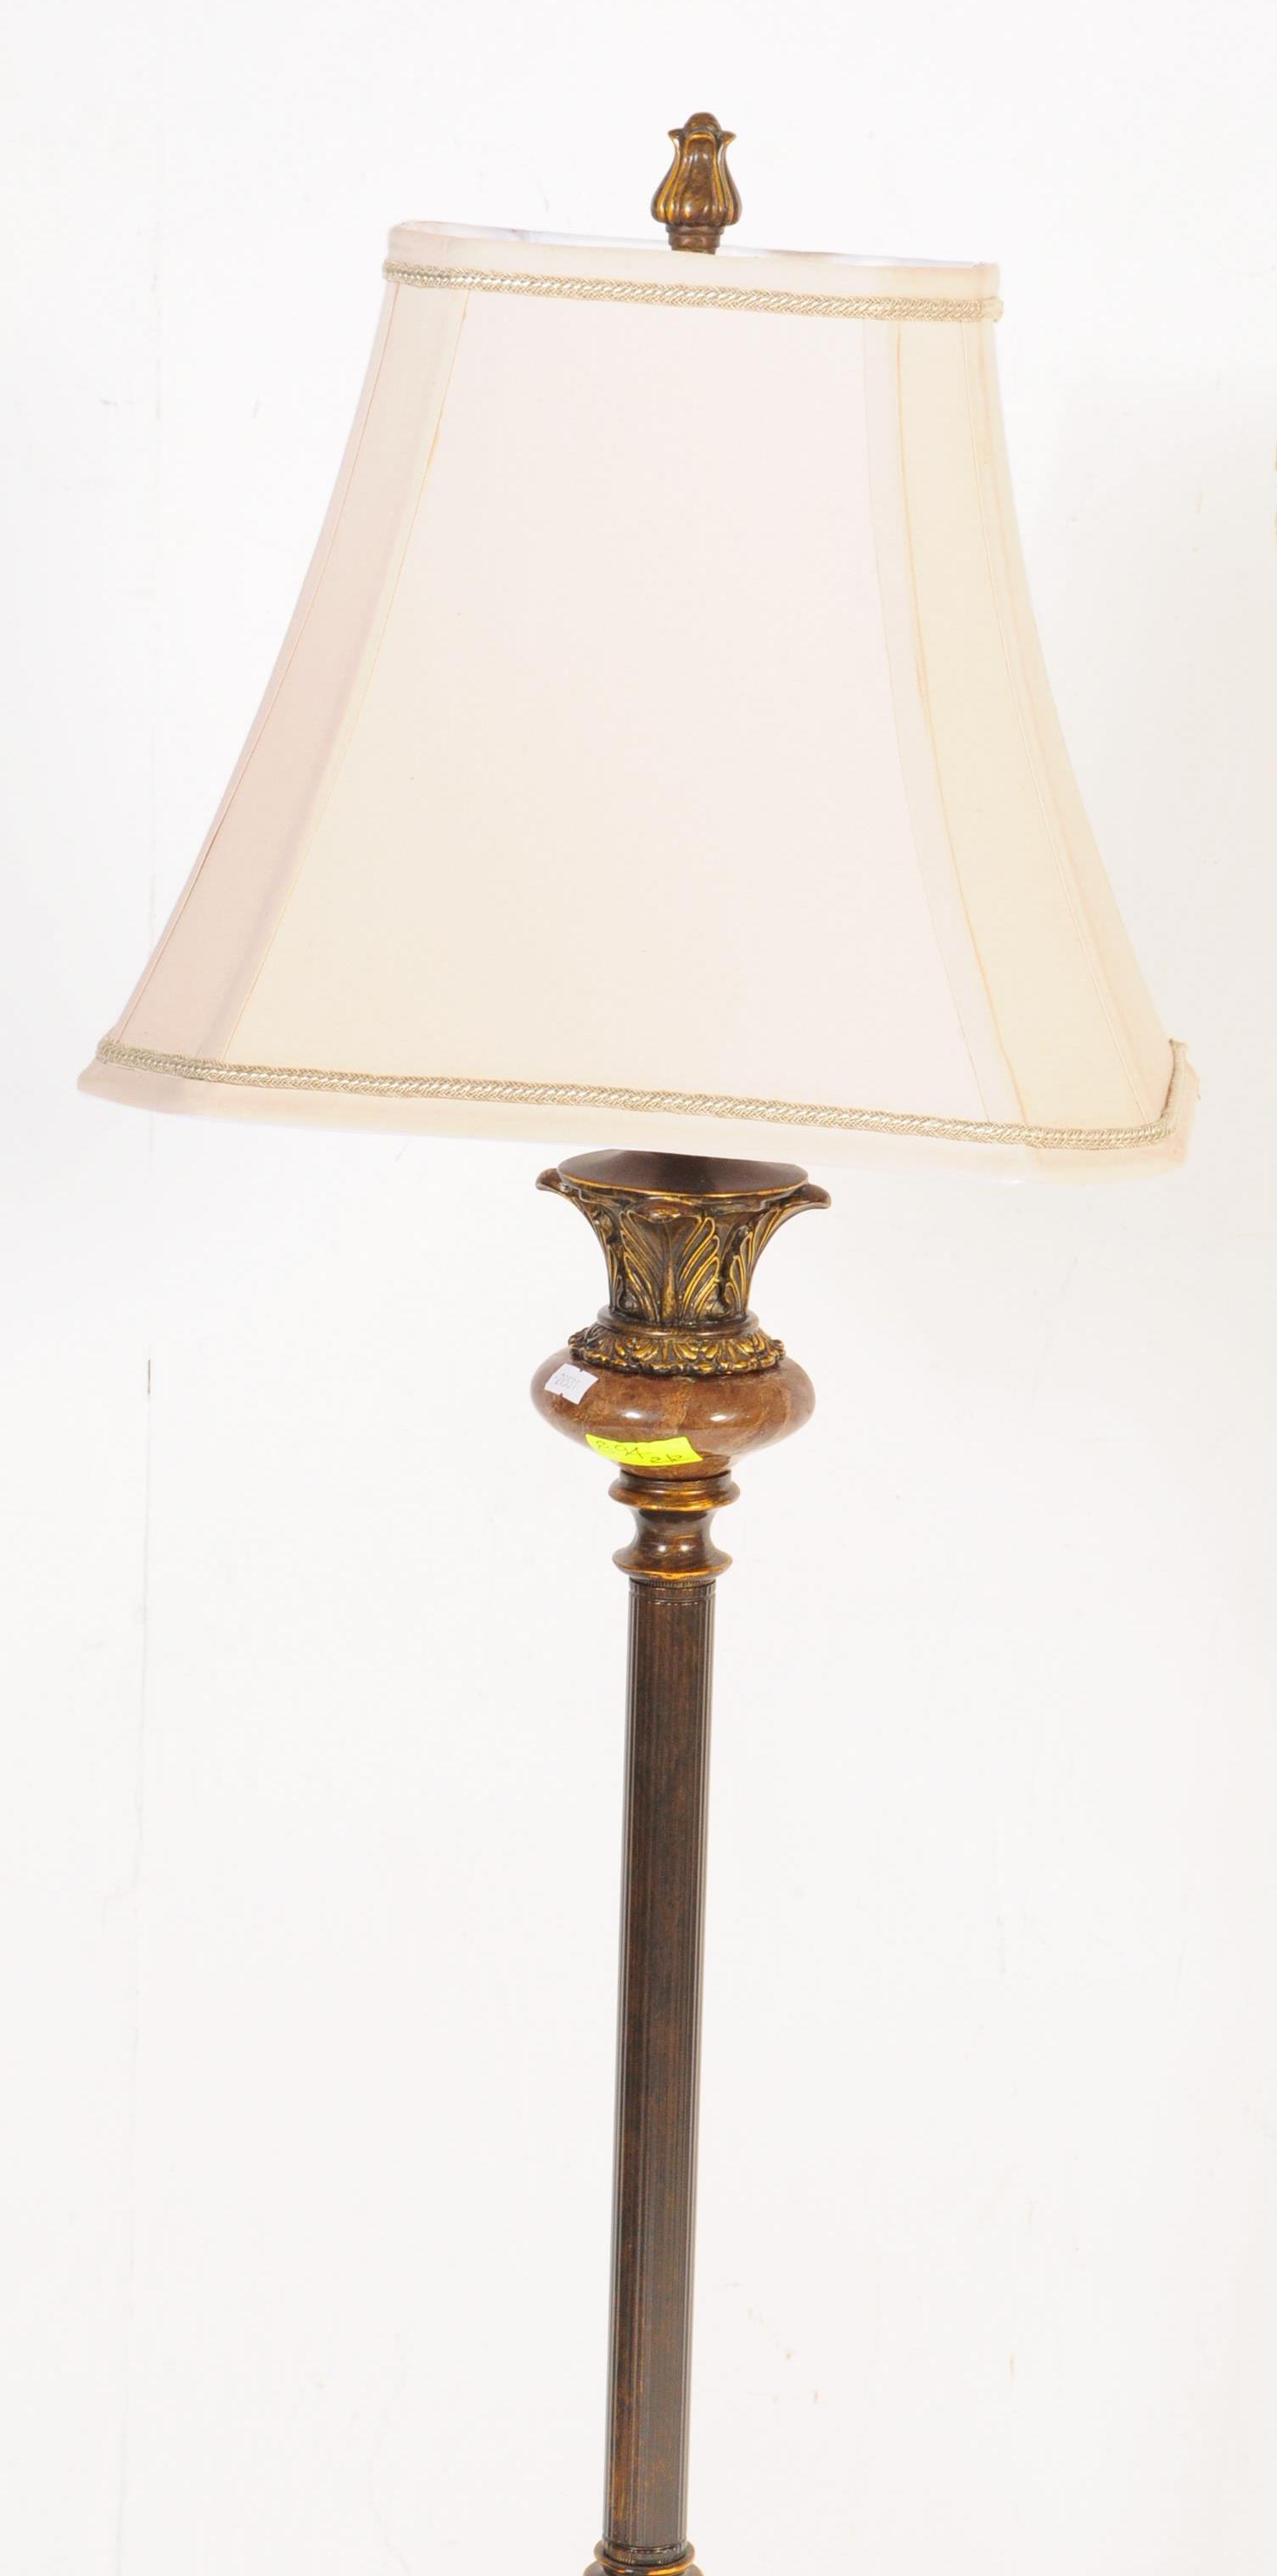 A PAIR OF 20TH CENTURY REGENCY STYLE FLOOR AND TABLE LAMPS - Image 2 of 5